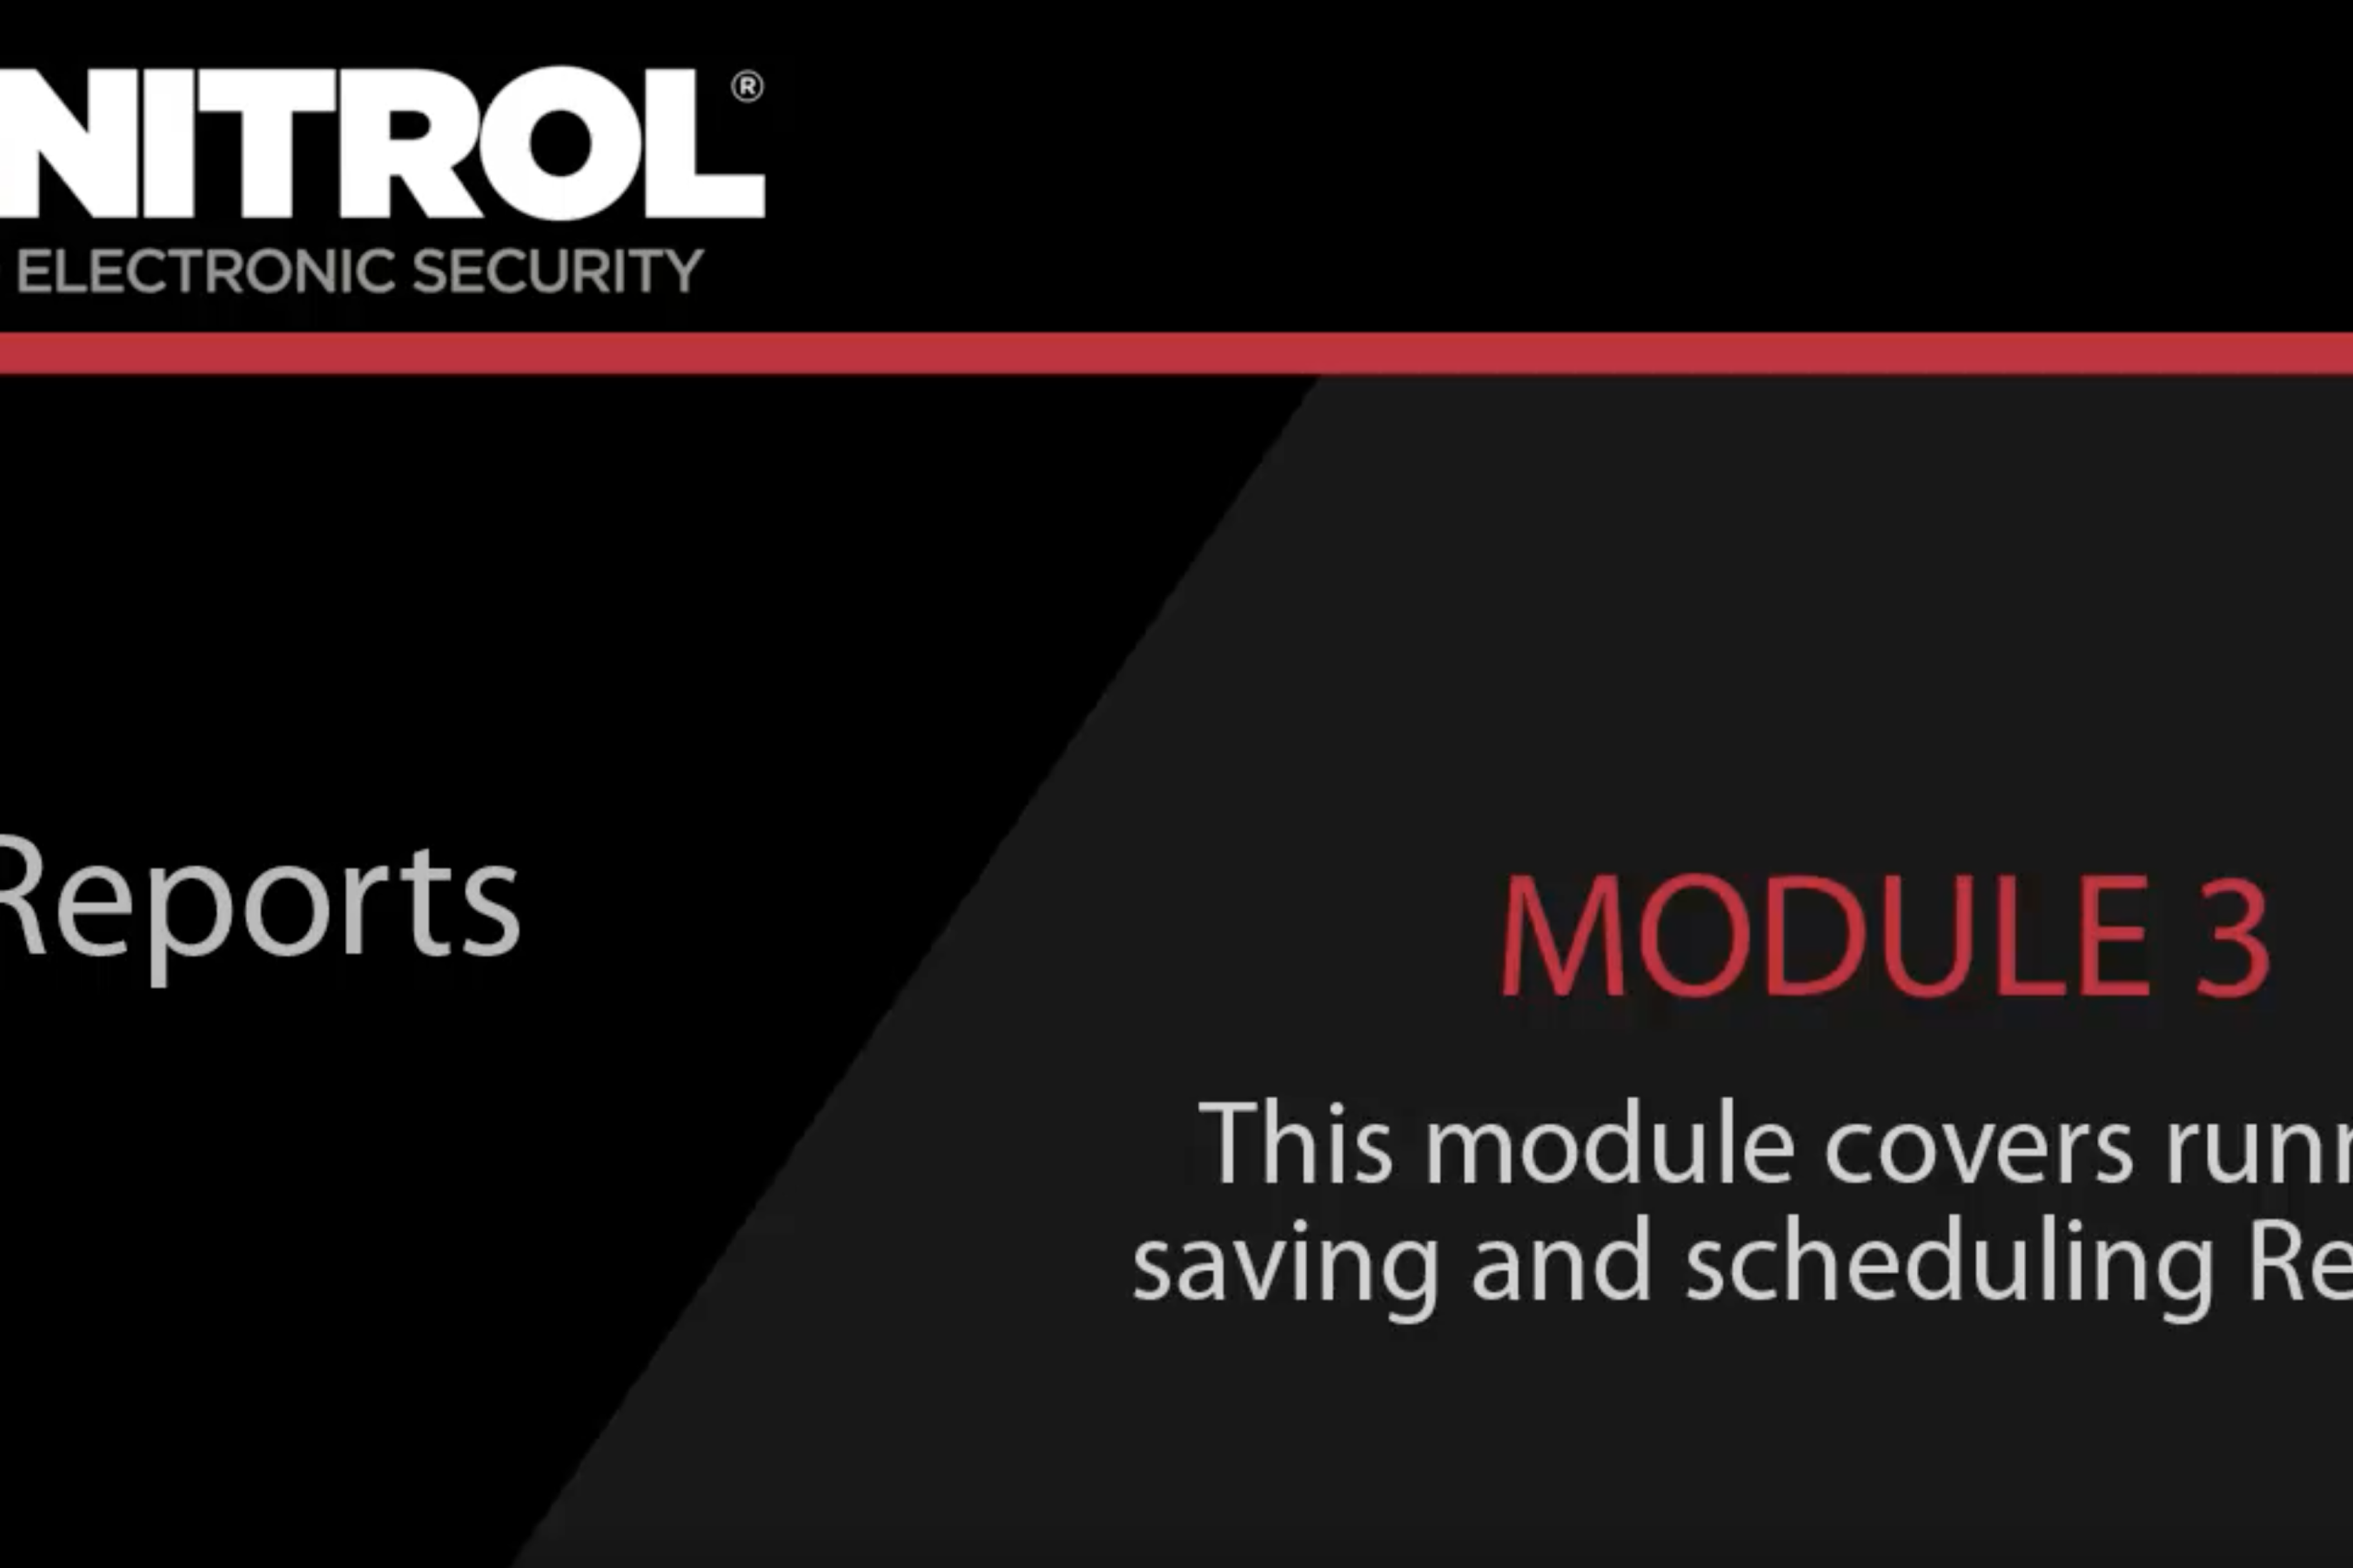 SONITROL Verified Electronic Security Reports Module 3 This module covers running, saving and scheduling reports.